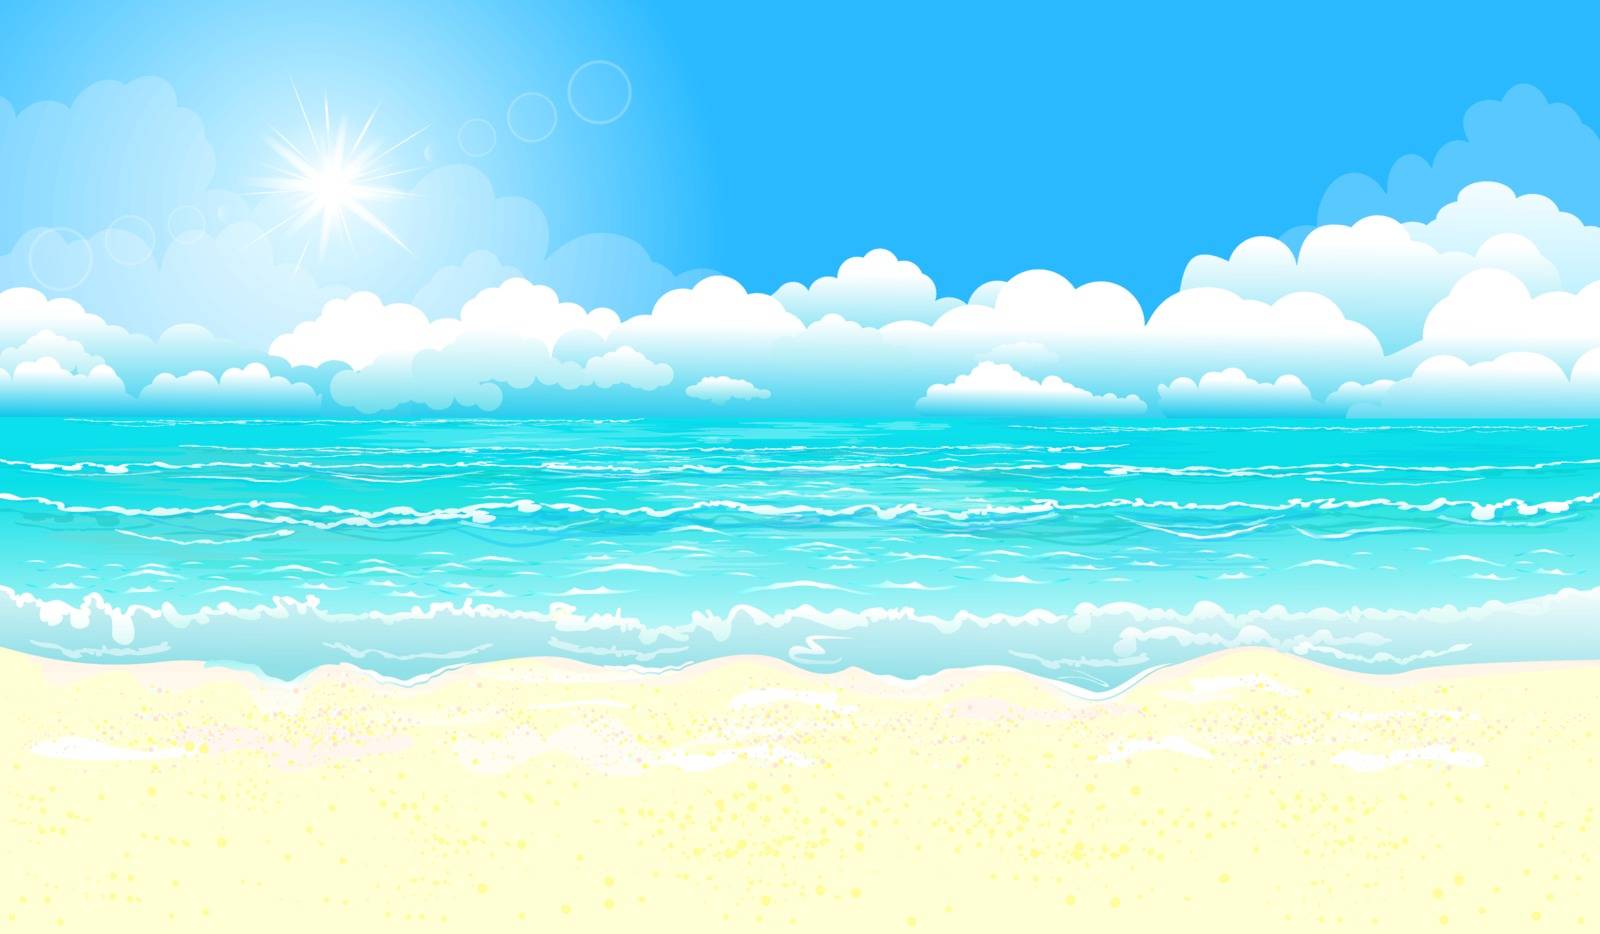 Ocean and sandy beach by liolle